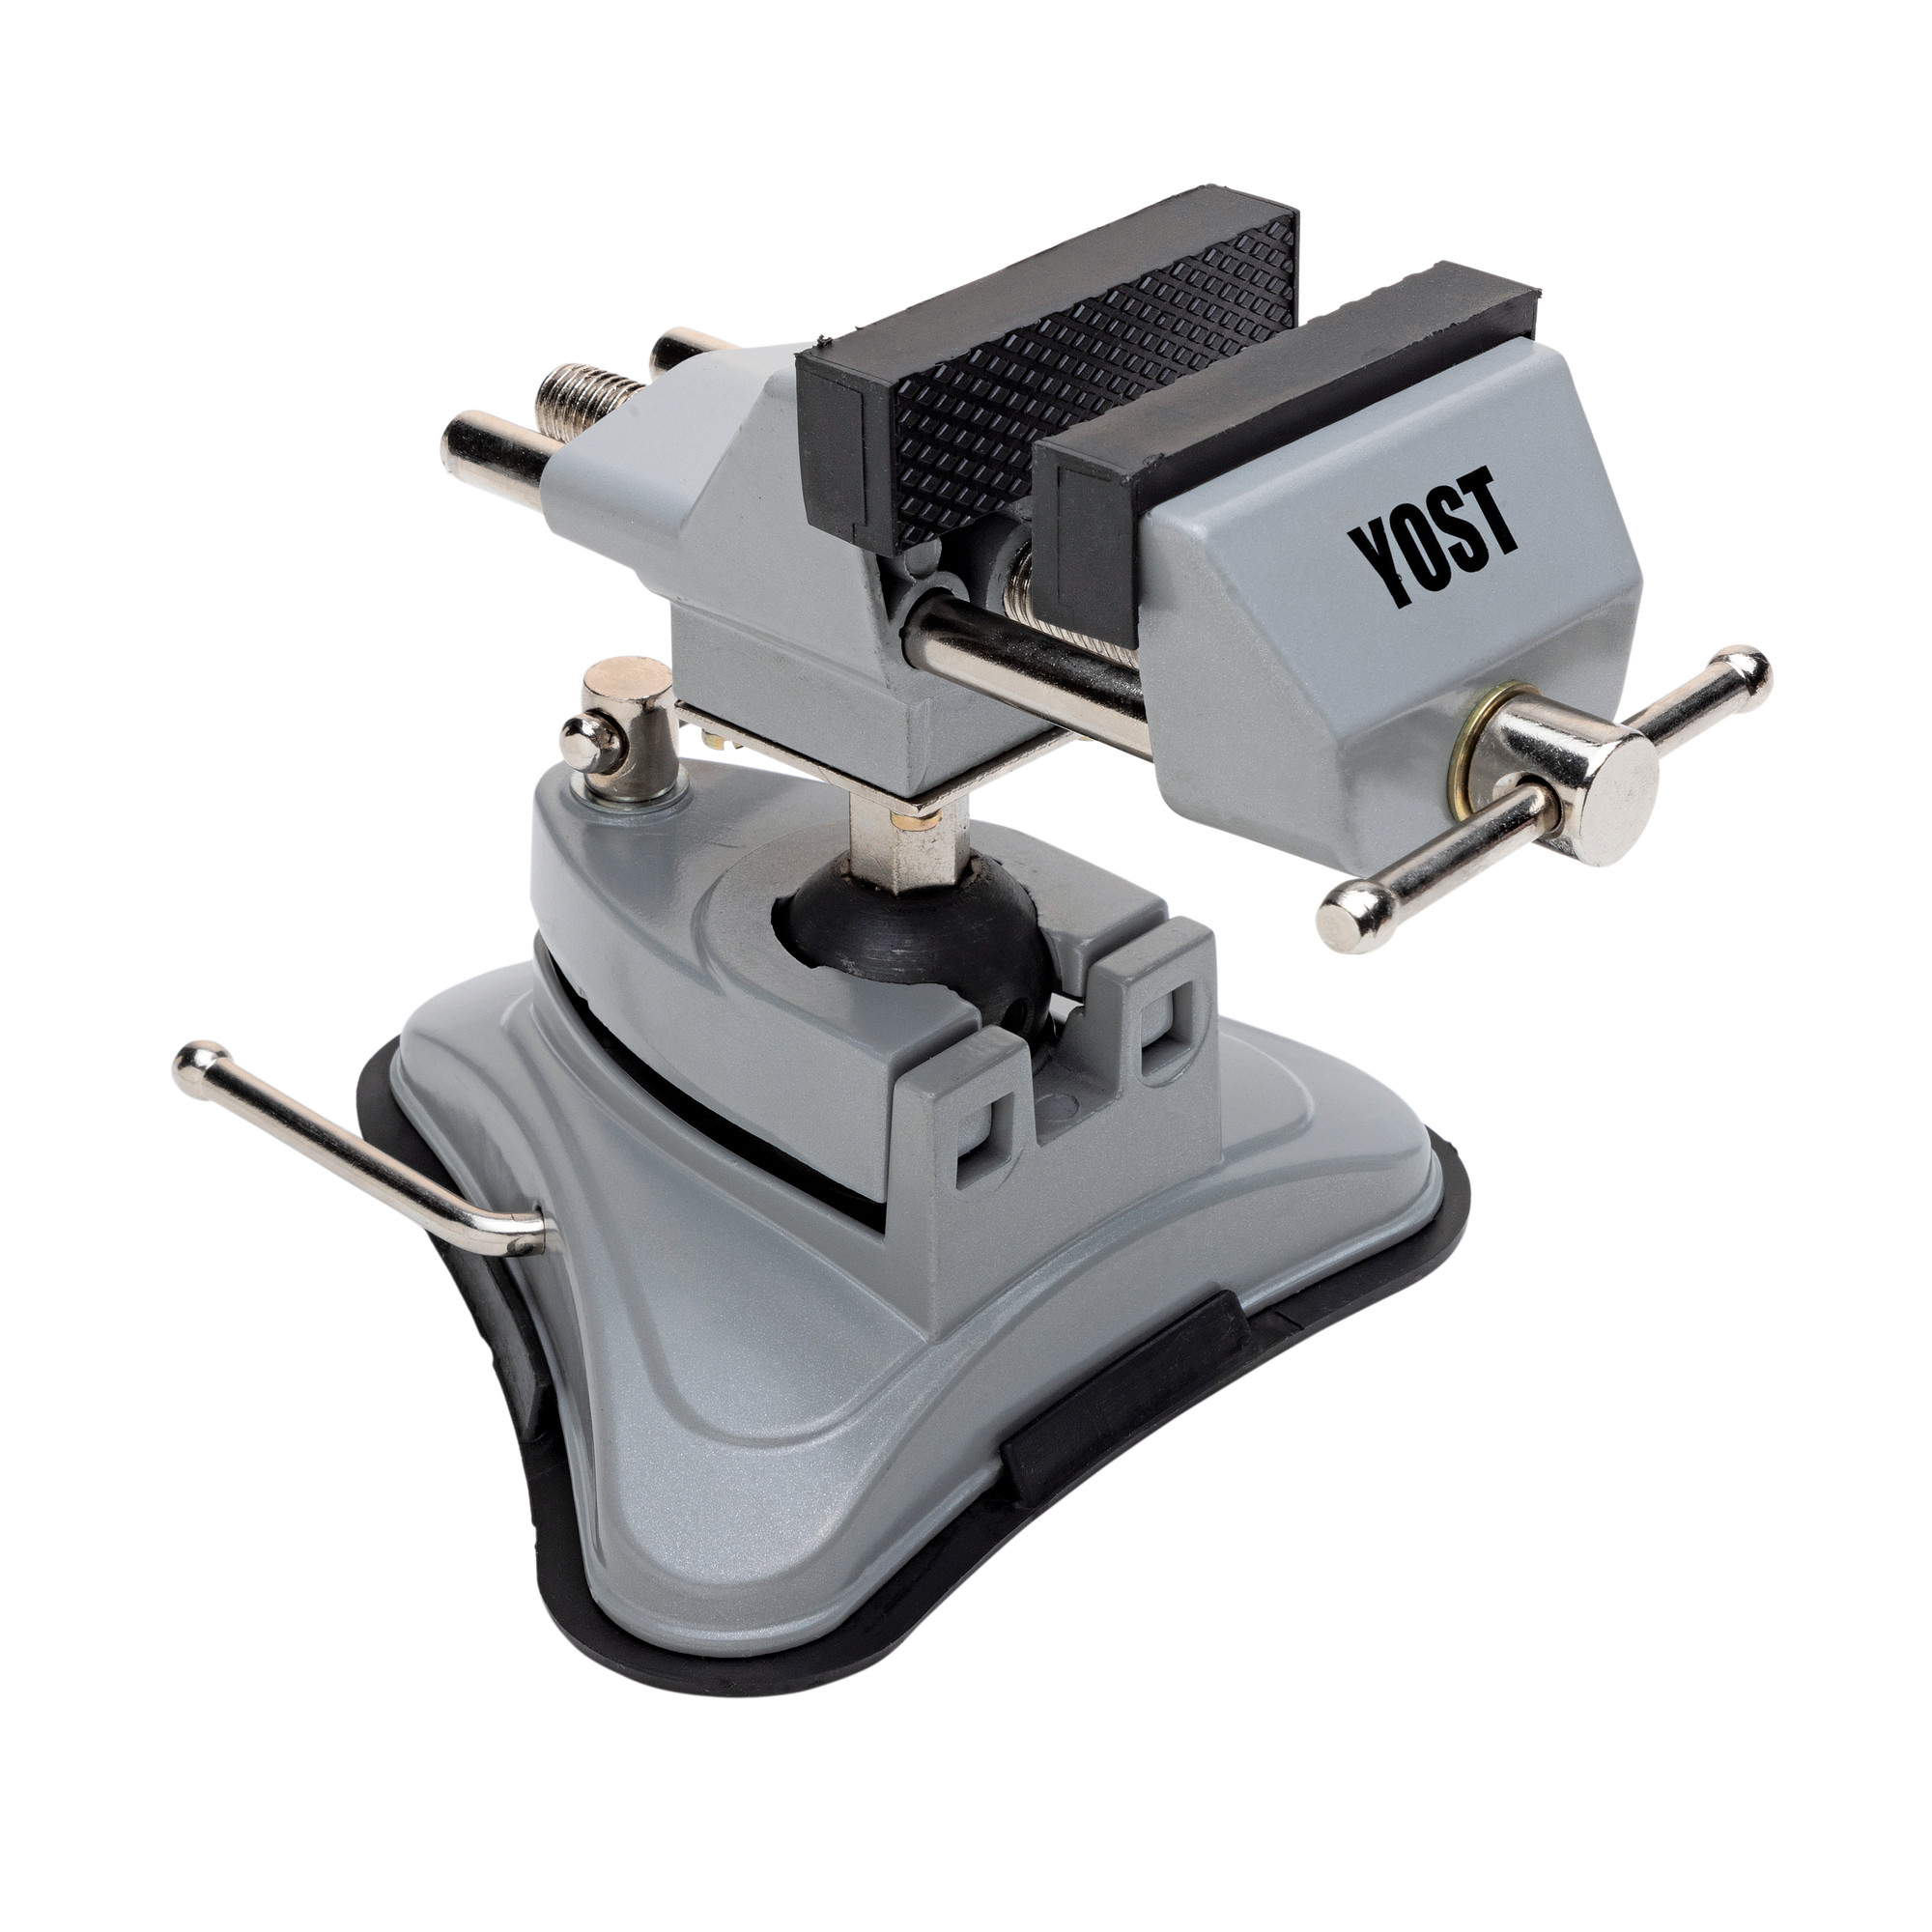 Yost Vises, 2.75Inch Portable Vise, Jaw Width 2.75 in, Jaw Capacity 2.5 in, Material Aluminum, Model V-275 -  56450